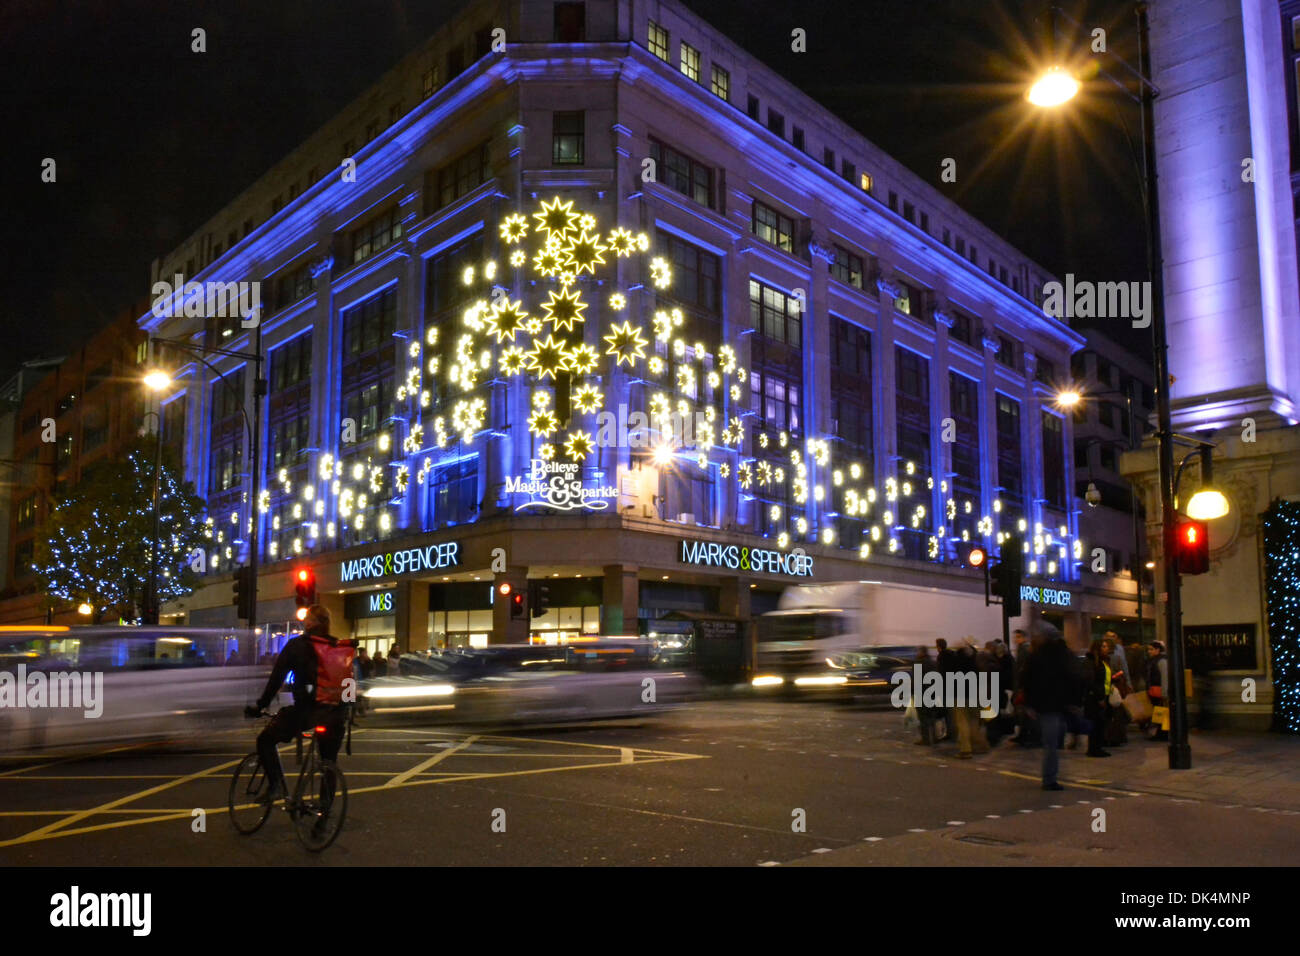 Christmas floodlights Xmas night lights Marks and Spencer store building corner of Oxford Street Baker Street M&S retail shopping business London UK Stock Photo